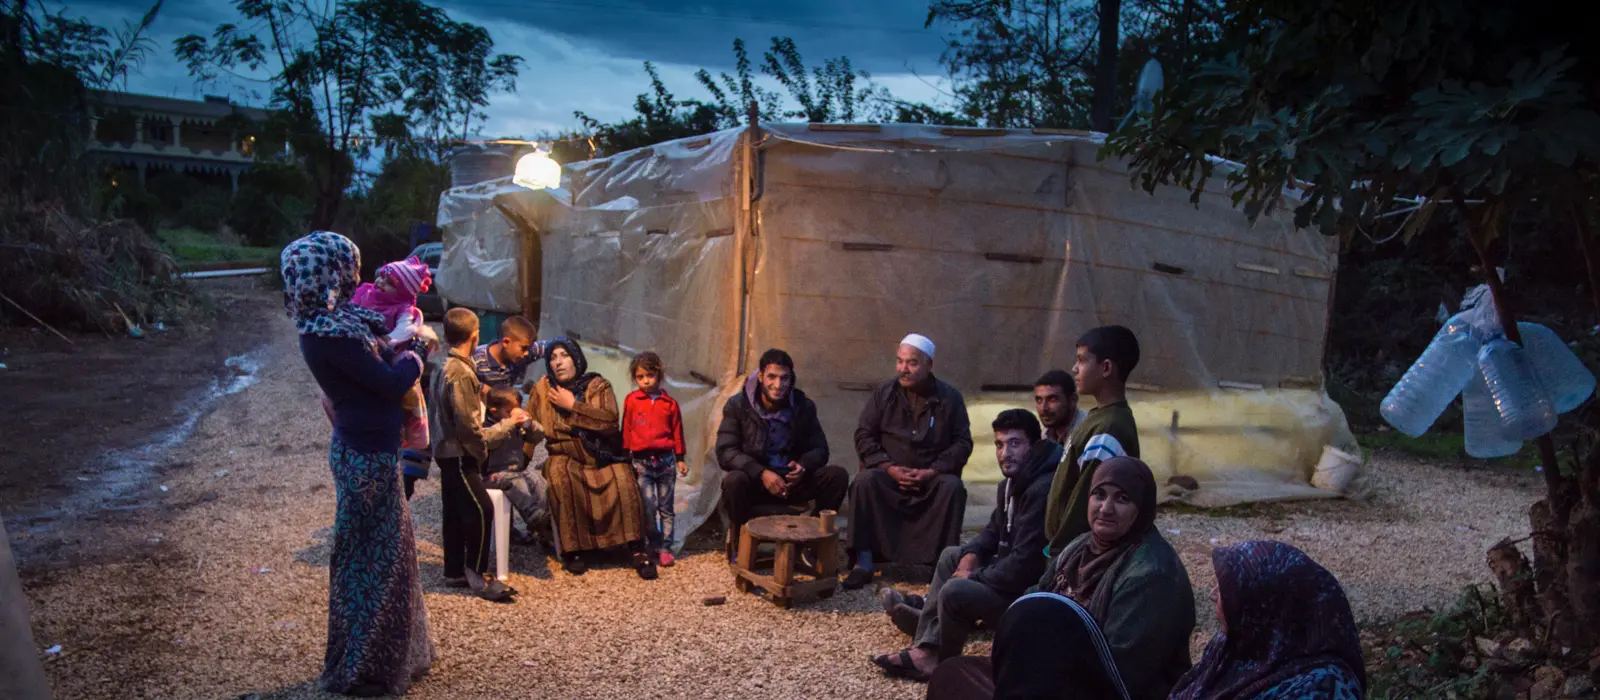 Syrian refugees gather at evening around an informal tented community in Lebanon